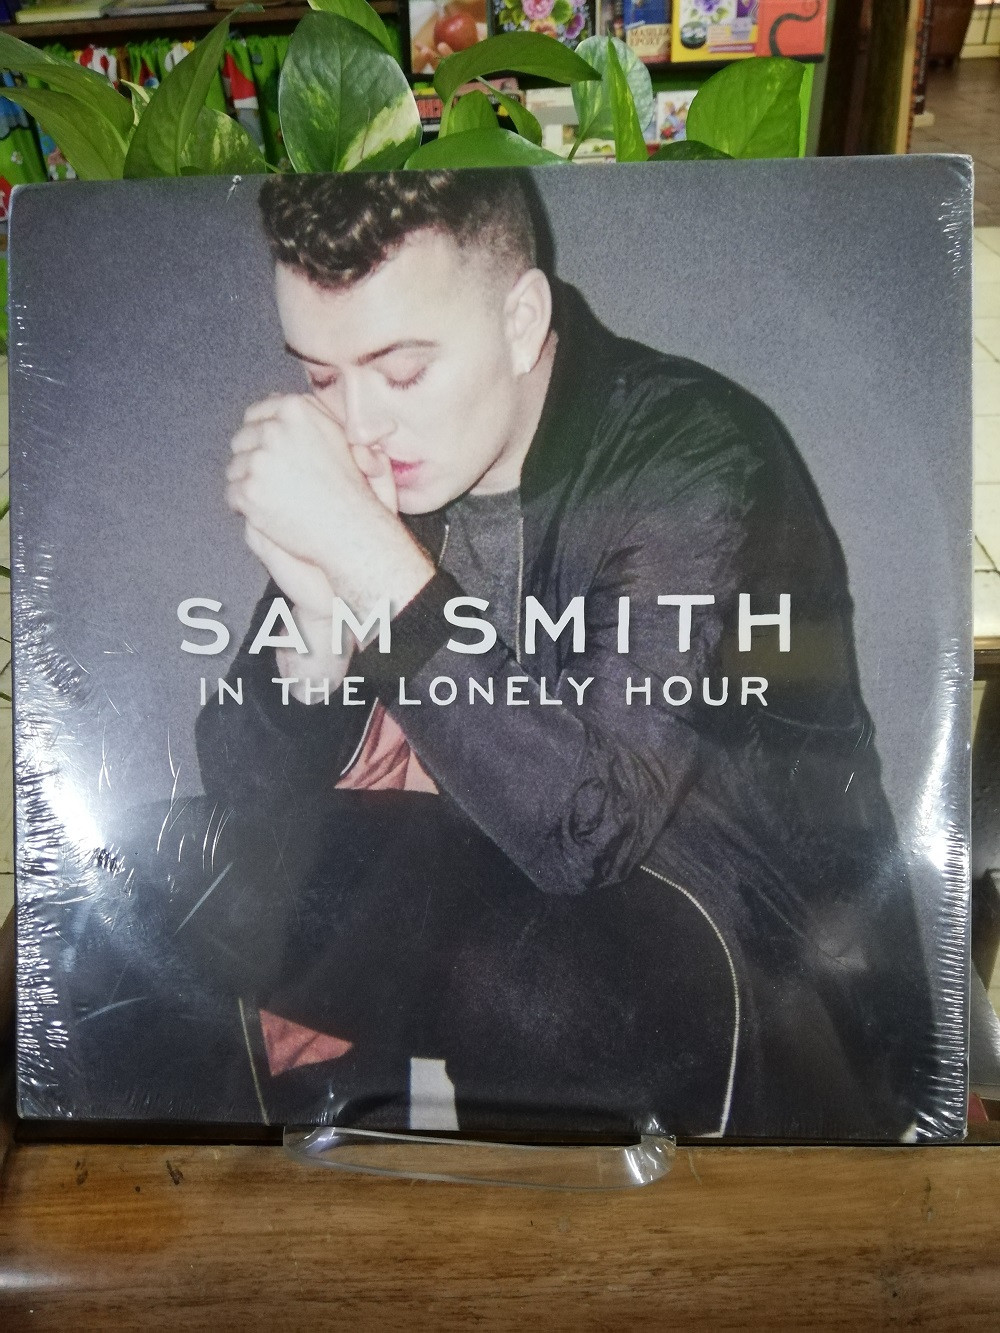 Imagen LP NUEVO SAM SMITH - IN THE LONELY HOUR 1